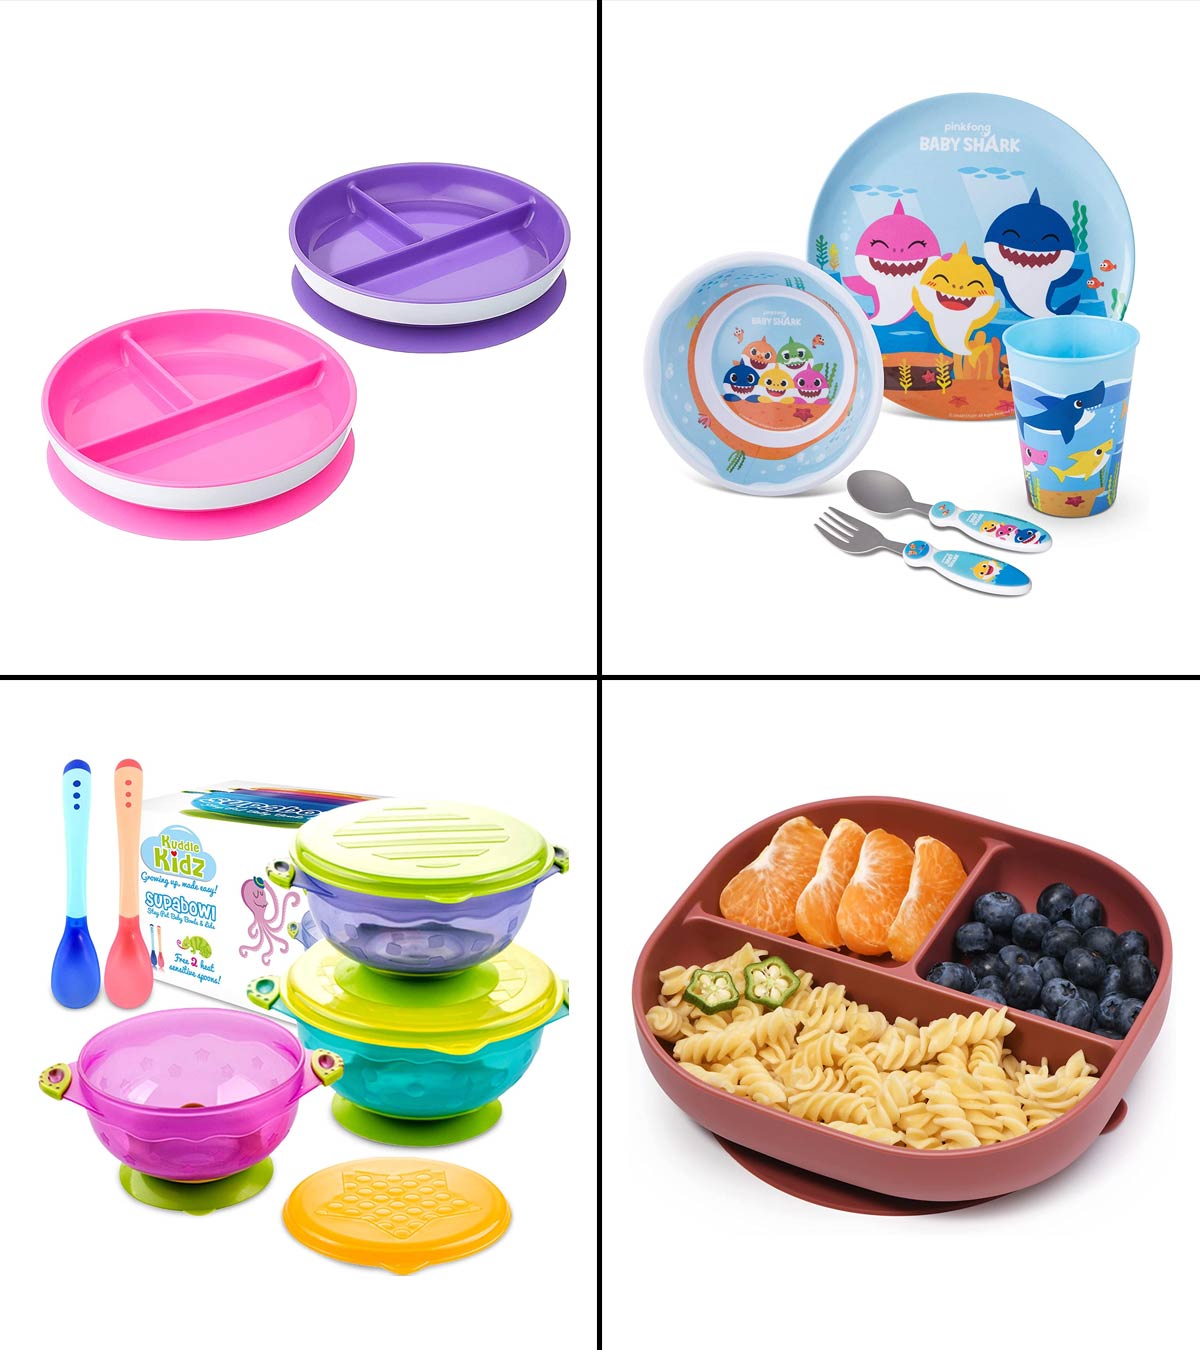 https://www.momjunction.com/wp-content/uploads/2021/09/15-Best-Baby-Bowls-And-Plates-In-2021.jpg